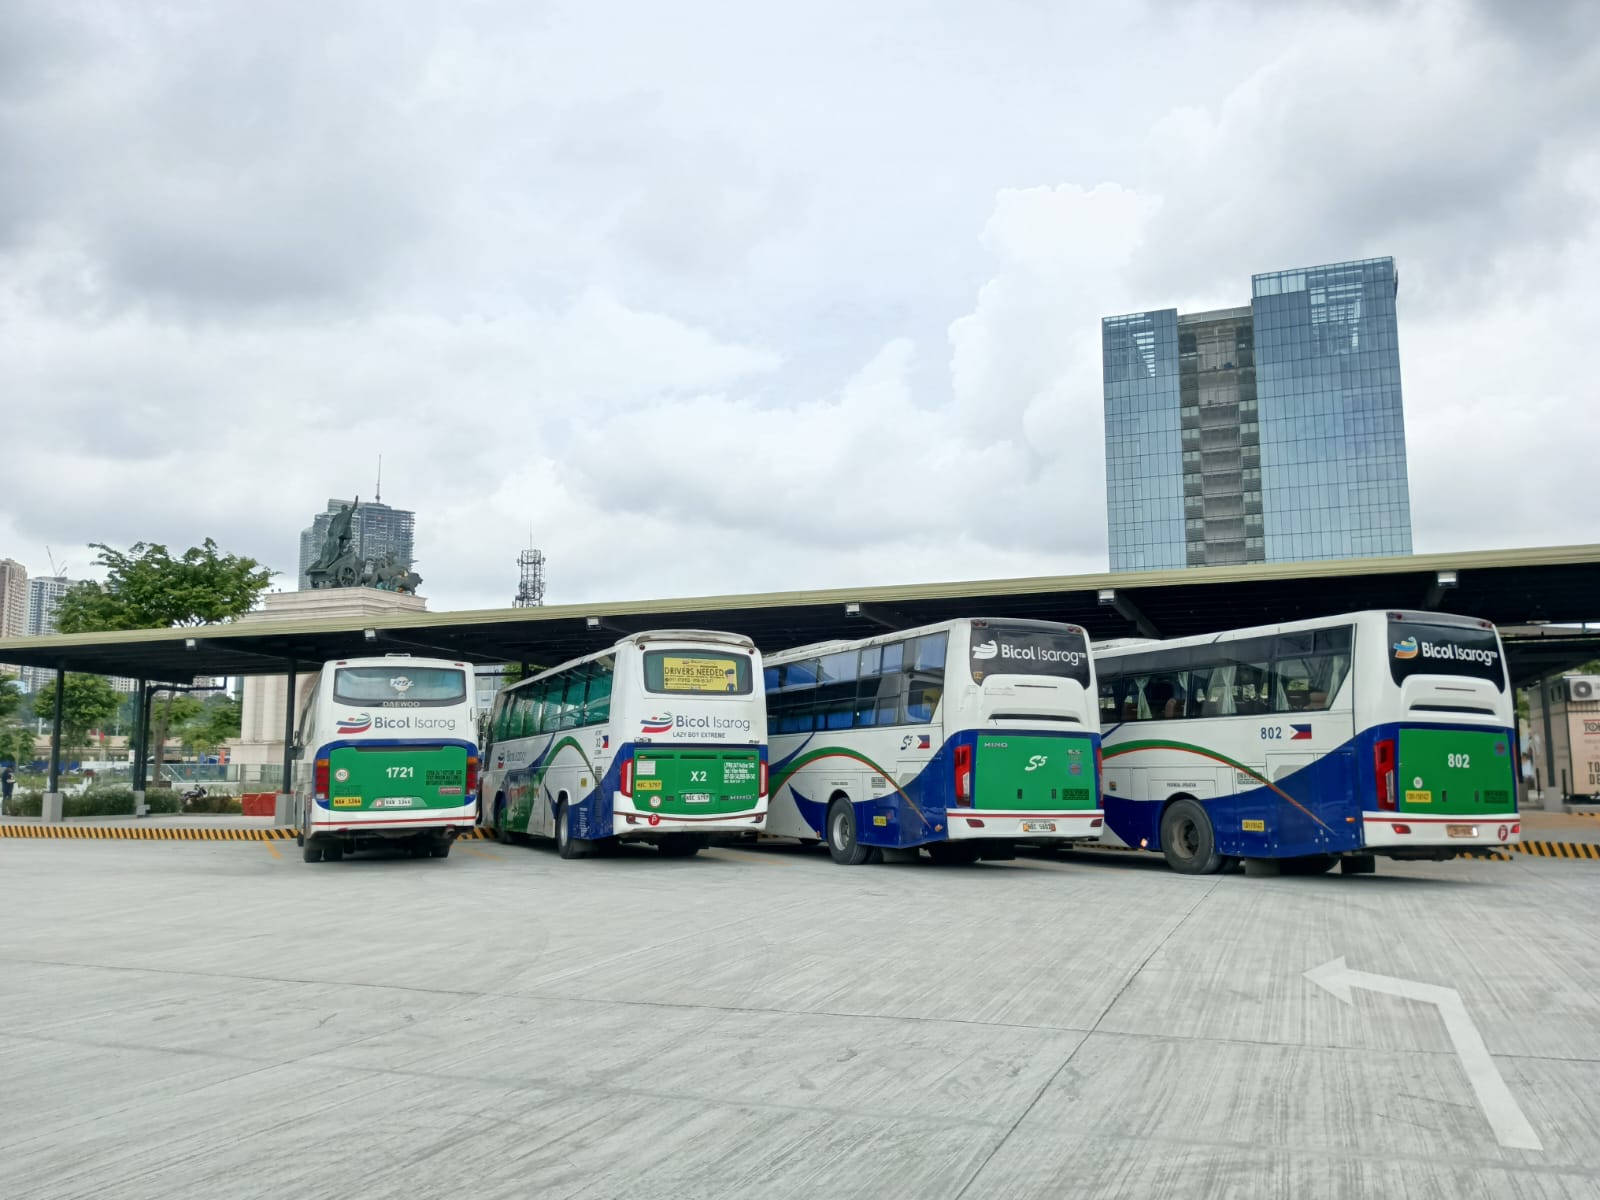 Bicol Isarog transport offers 6 routes to and from Bicol in Arcovia City Pasig